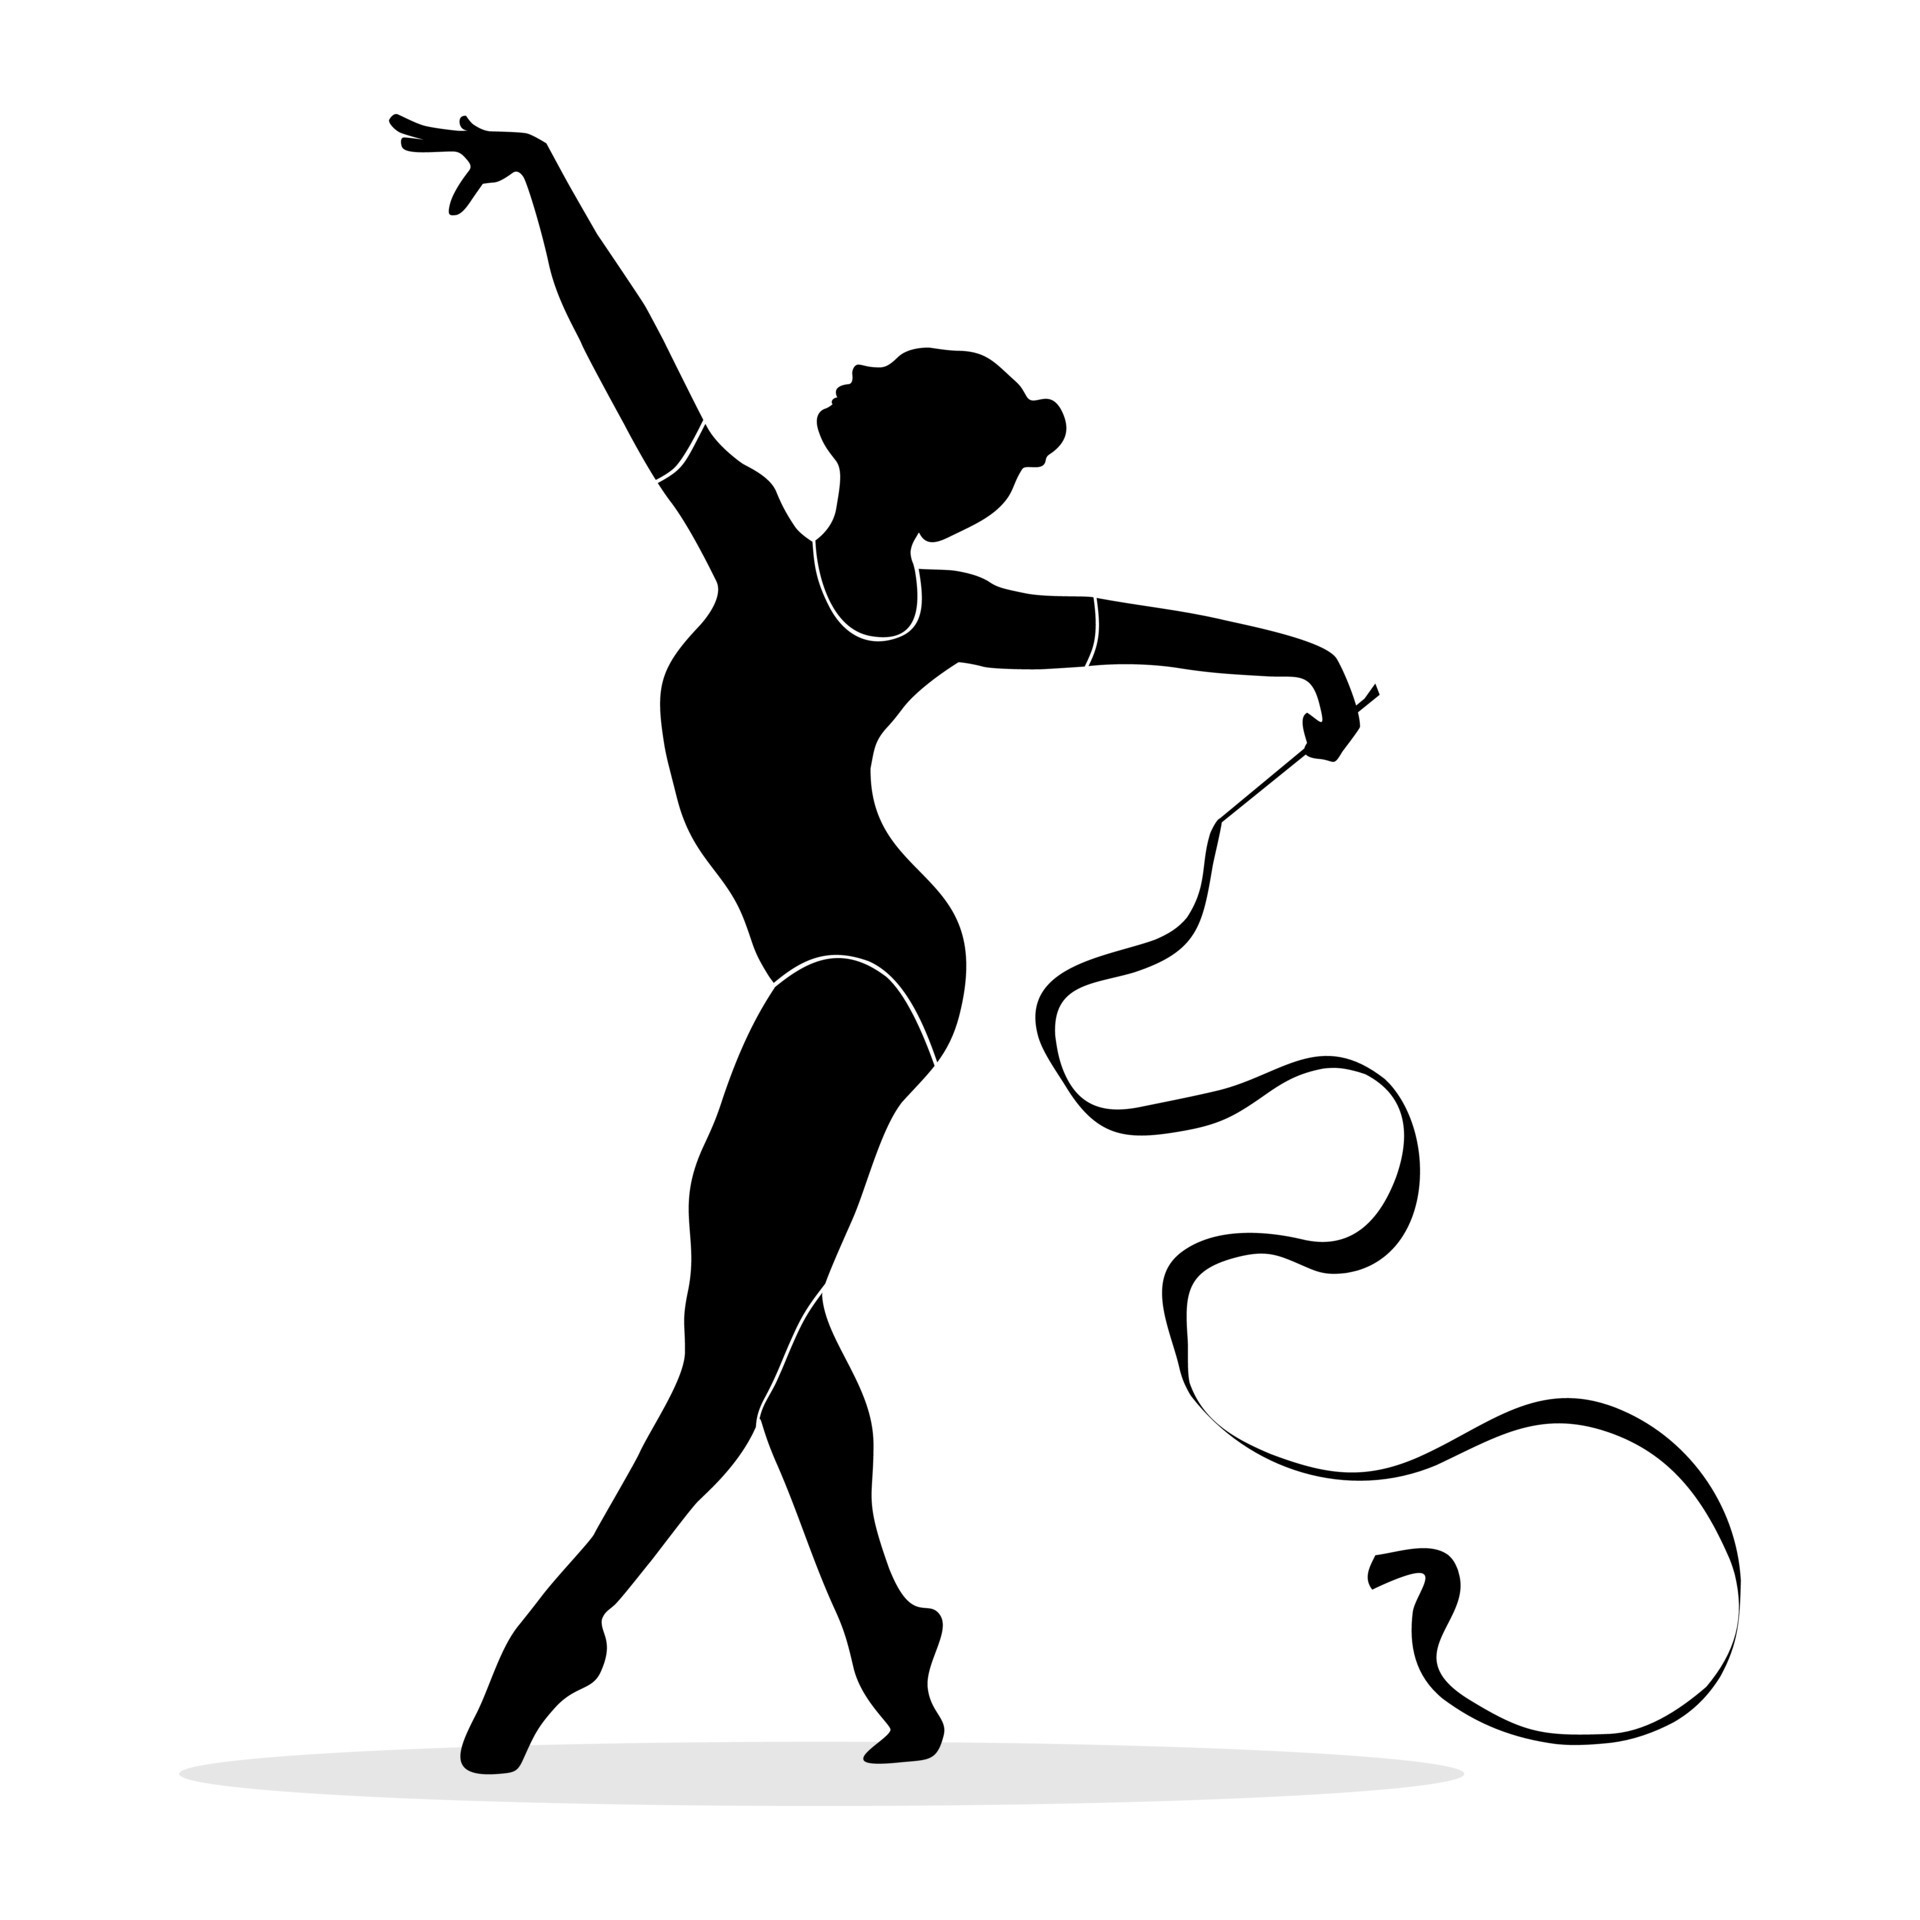 https://static.vecteezy.com/system/resources/previews/022/513/000/original/silhouette-of-woman-dancing-rhythmic-gymnastics-with-ribbon-silhouette-illustration-vector.jpg